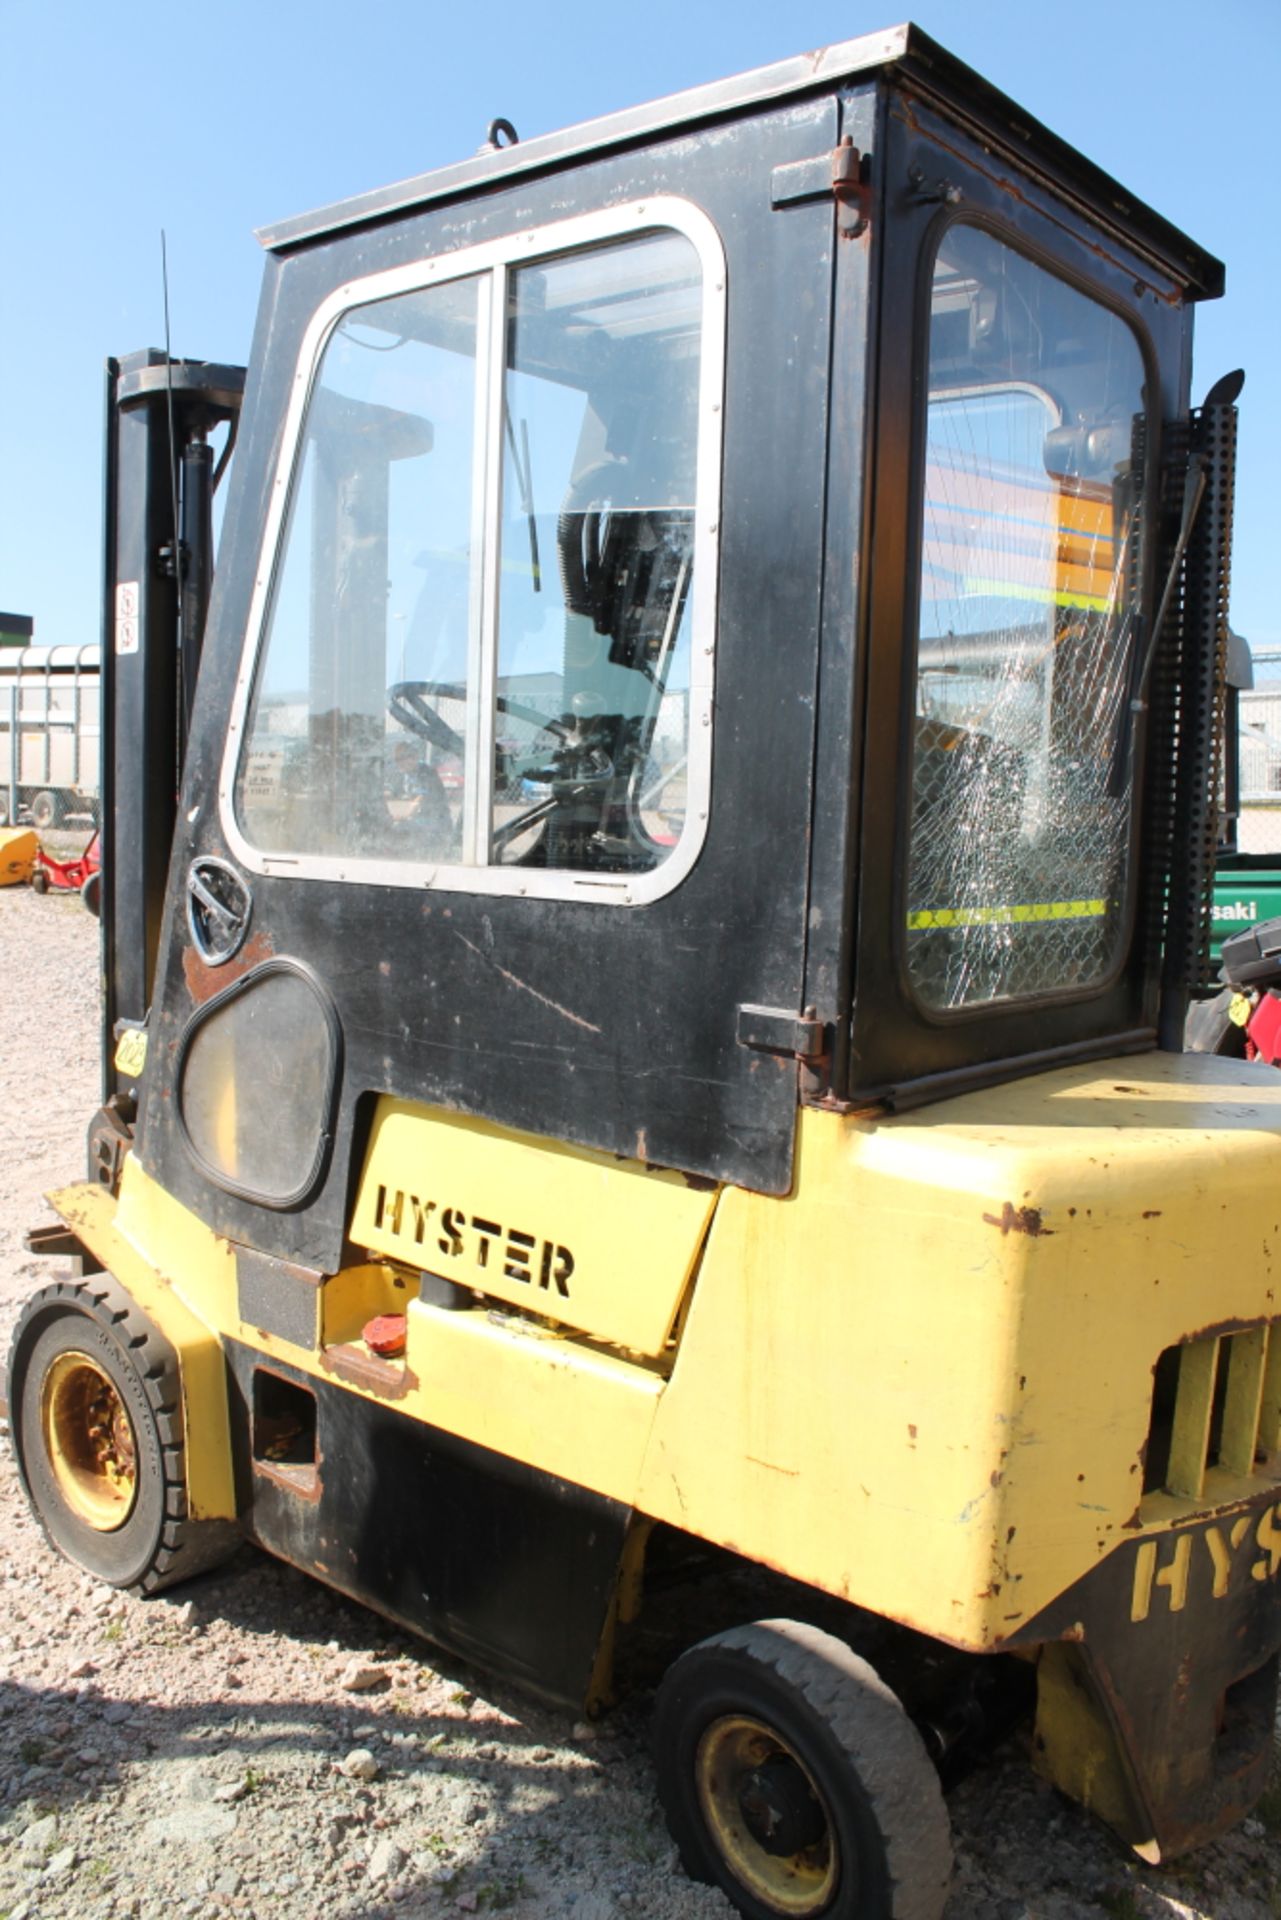 Sale Item:   HYSTER FORKLIFT KEY IN P/CABIN   Vat Status:    Plus Vat @ 20 %   Buyers Fees on this l - Image 2 of 3